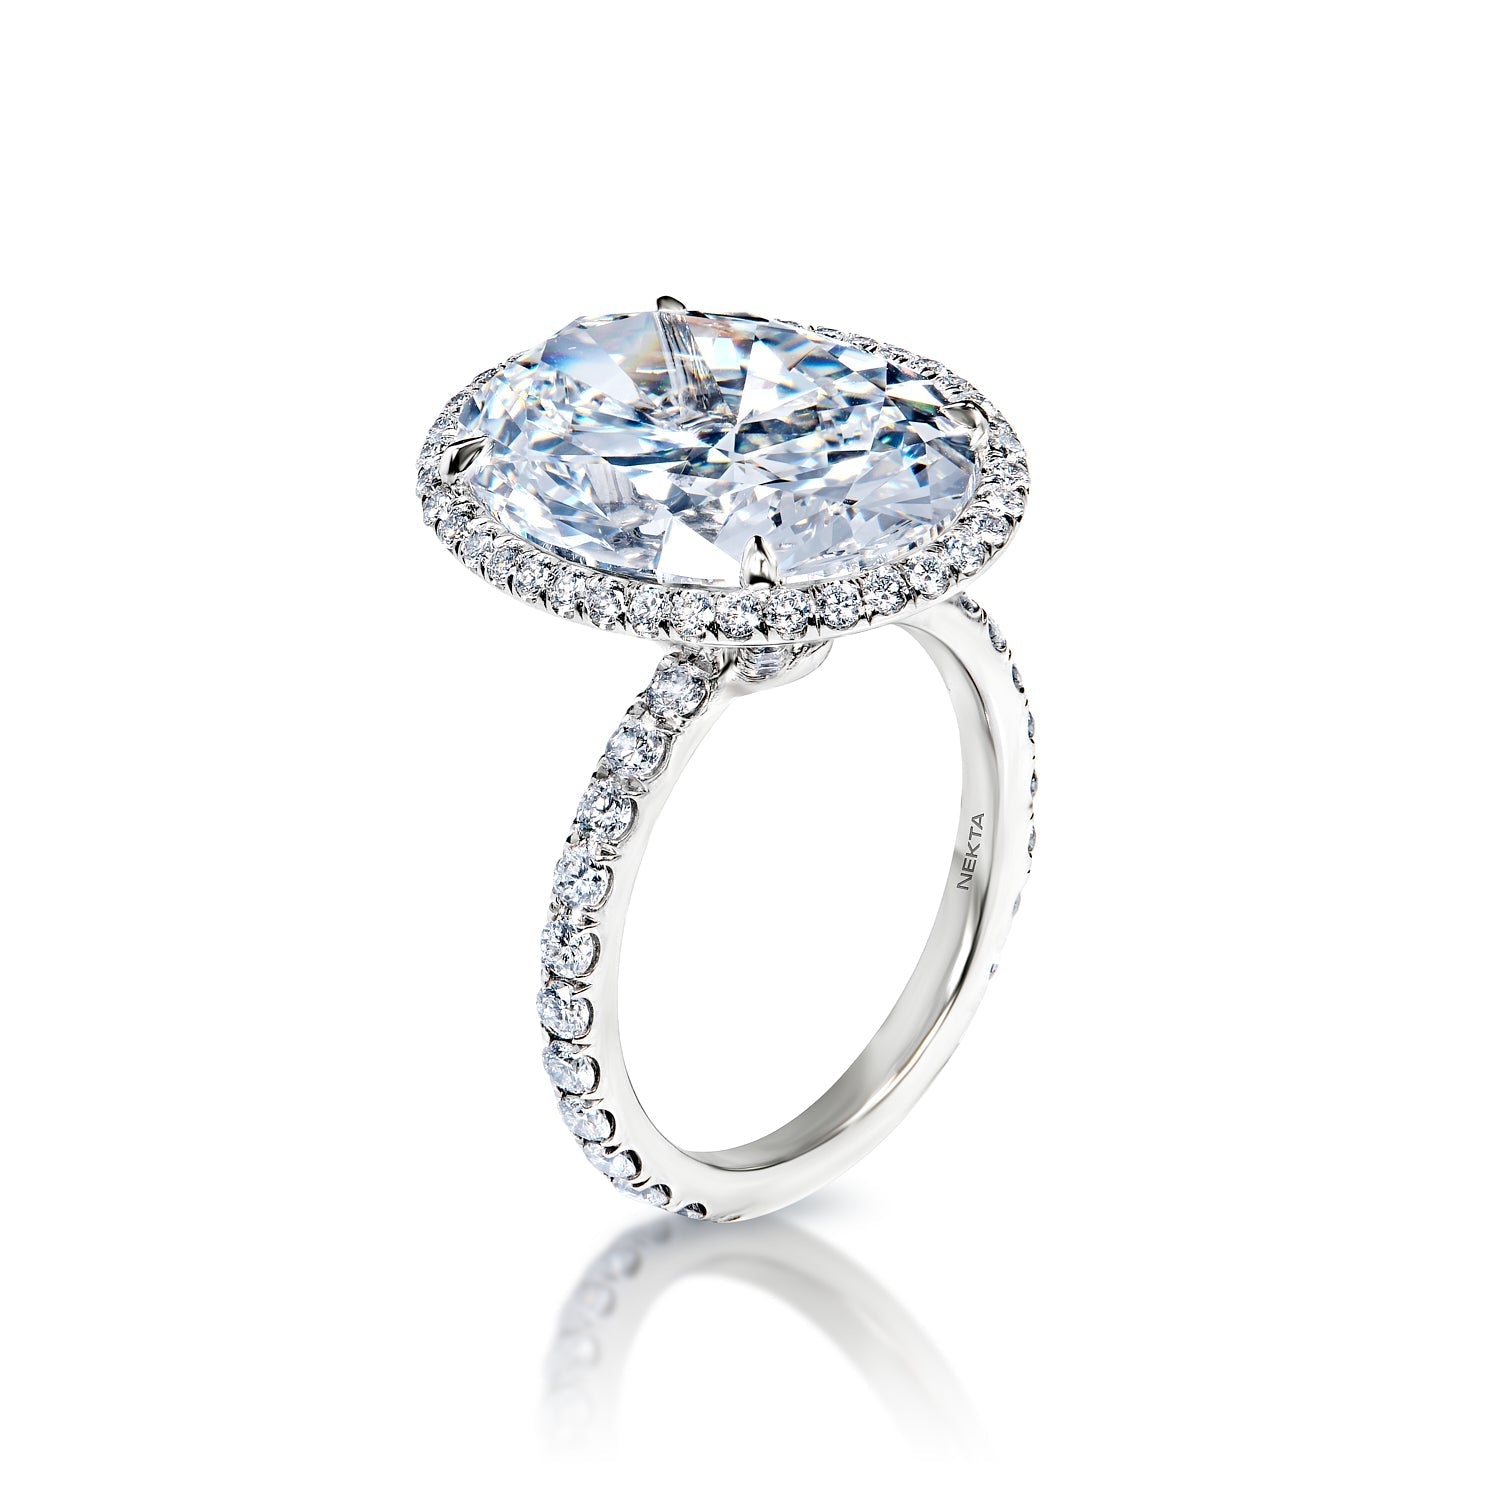 Christina 11 Carats F IF Oval Cut Diamond Engagement Ring in Platinum Side View